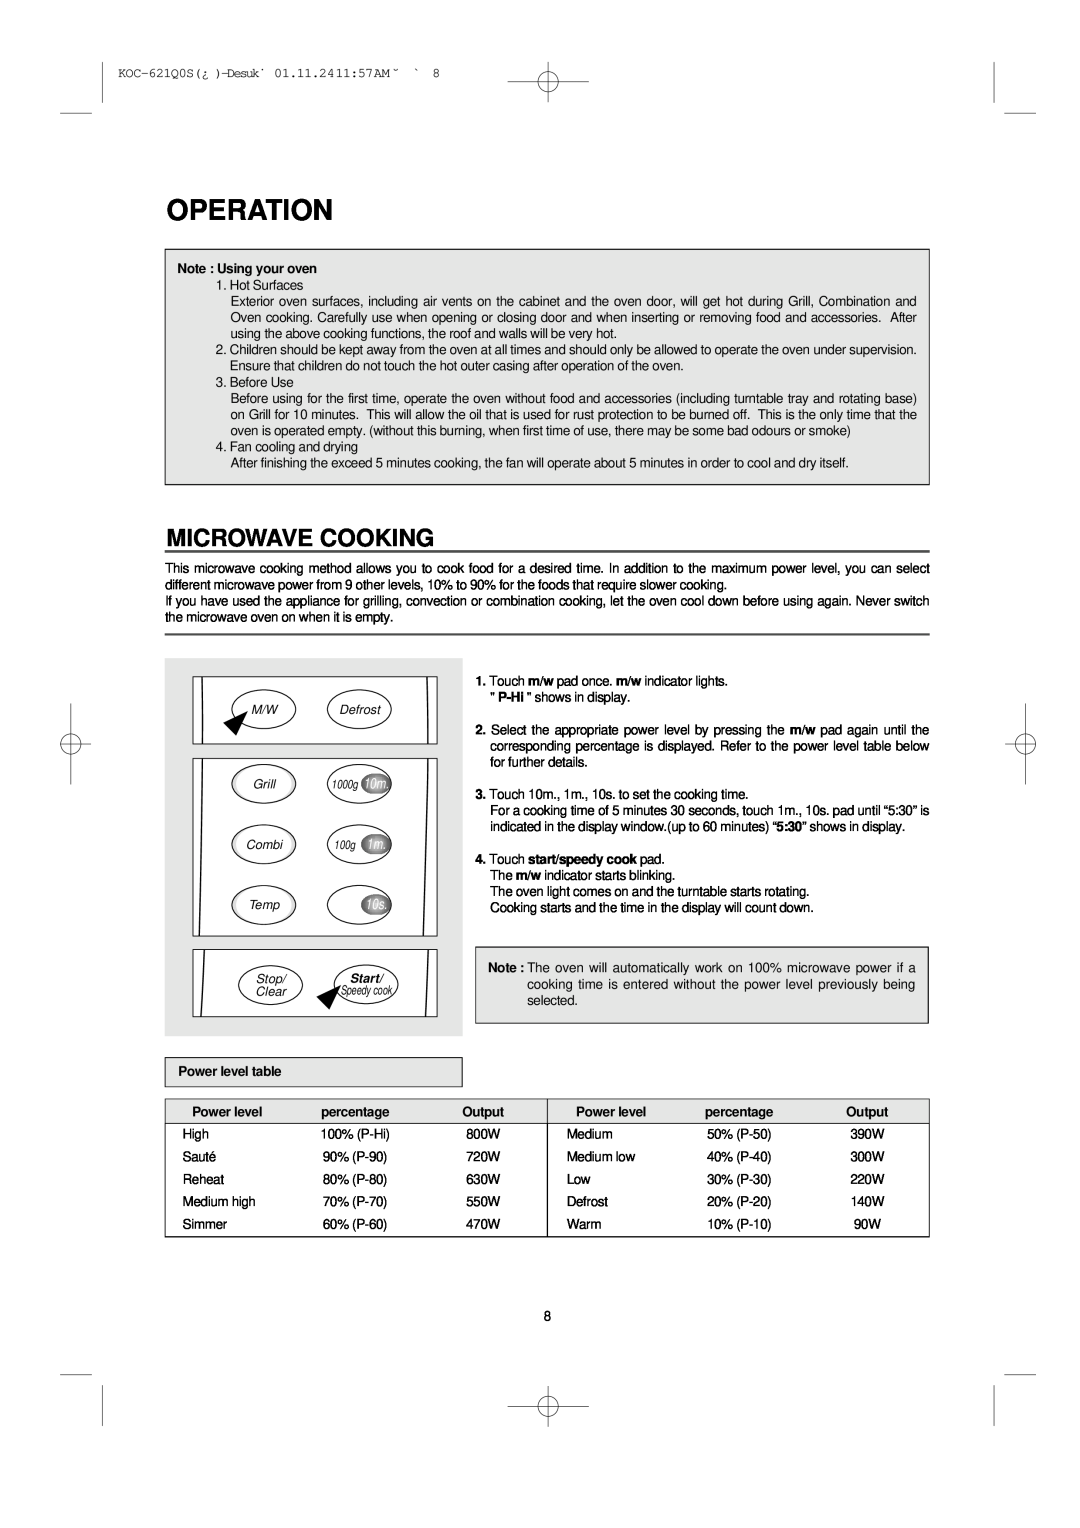 Daewoo KOC-621Q owner manual Operation, Microwave Cooking, Note Using your oven, Power level table, percentage, Output 